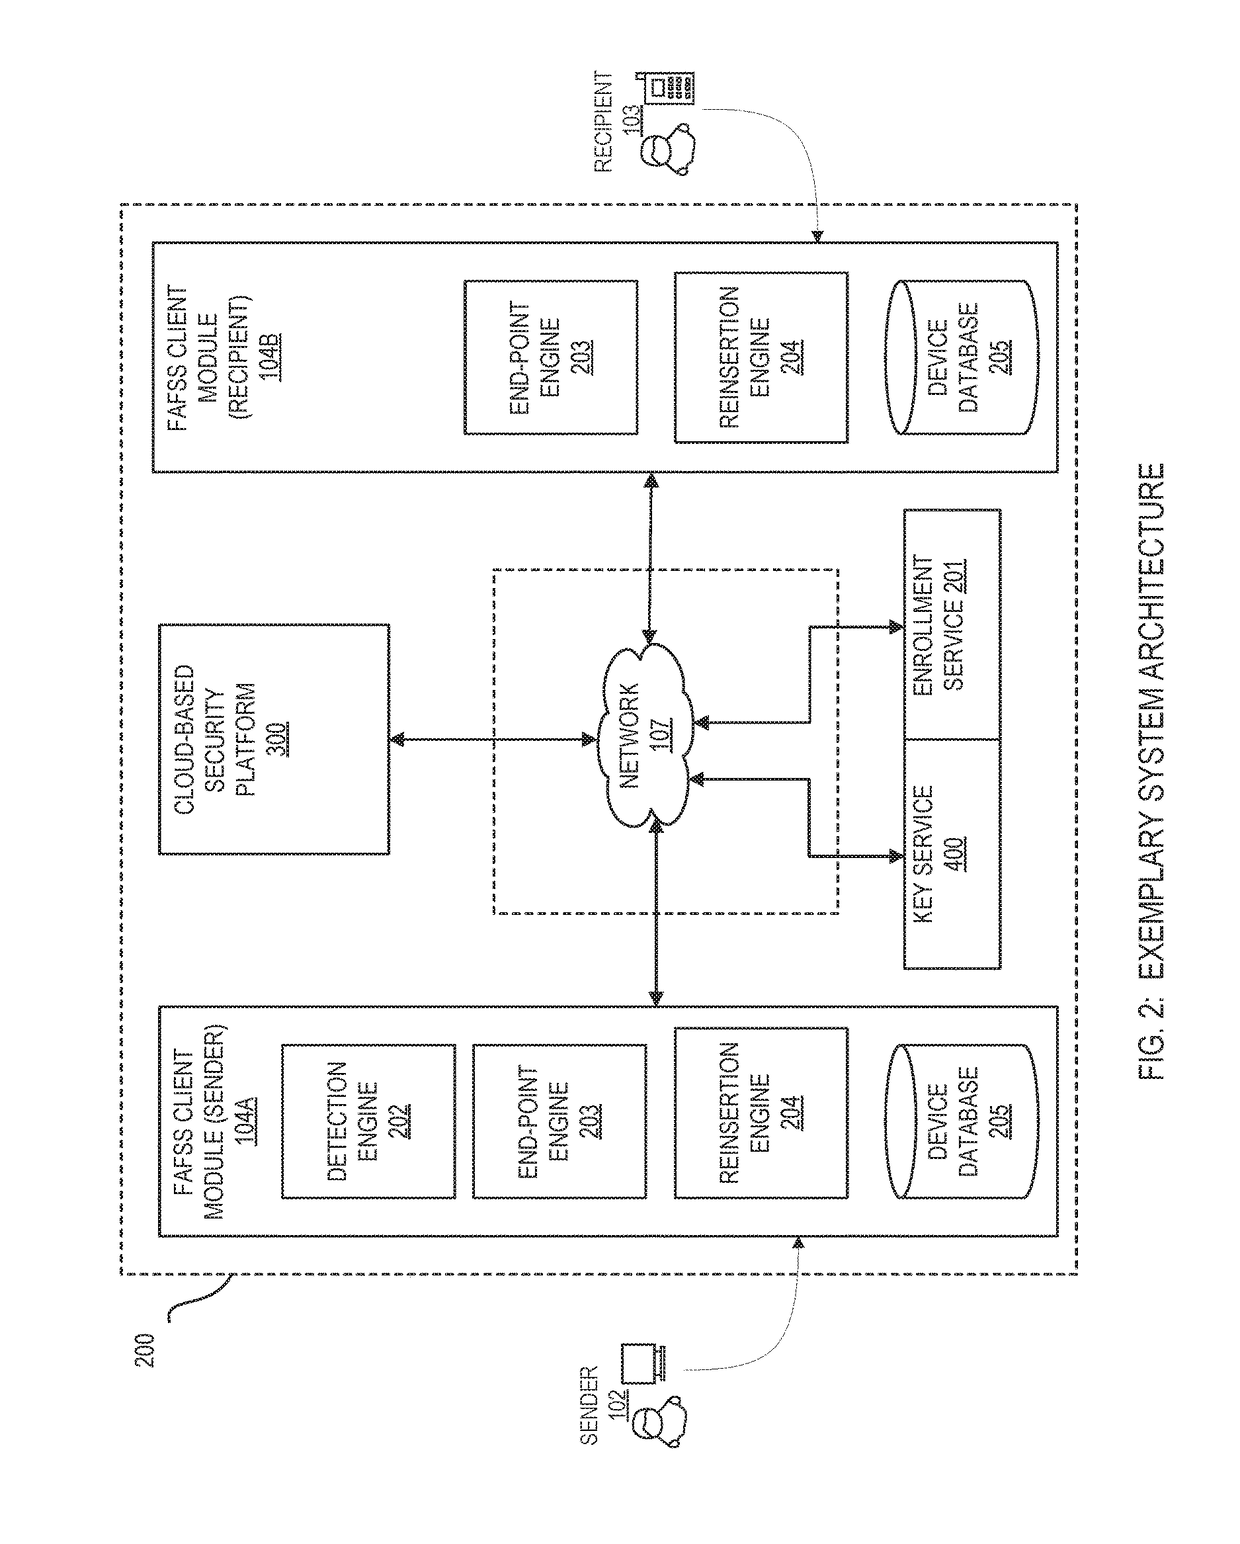 Systems and methods for encryption and provision of information security using platform services